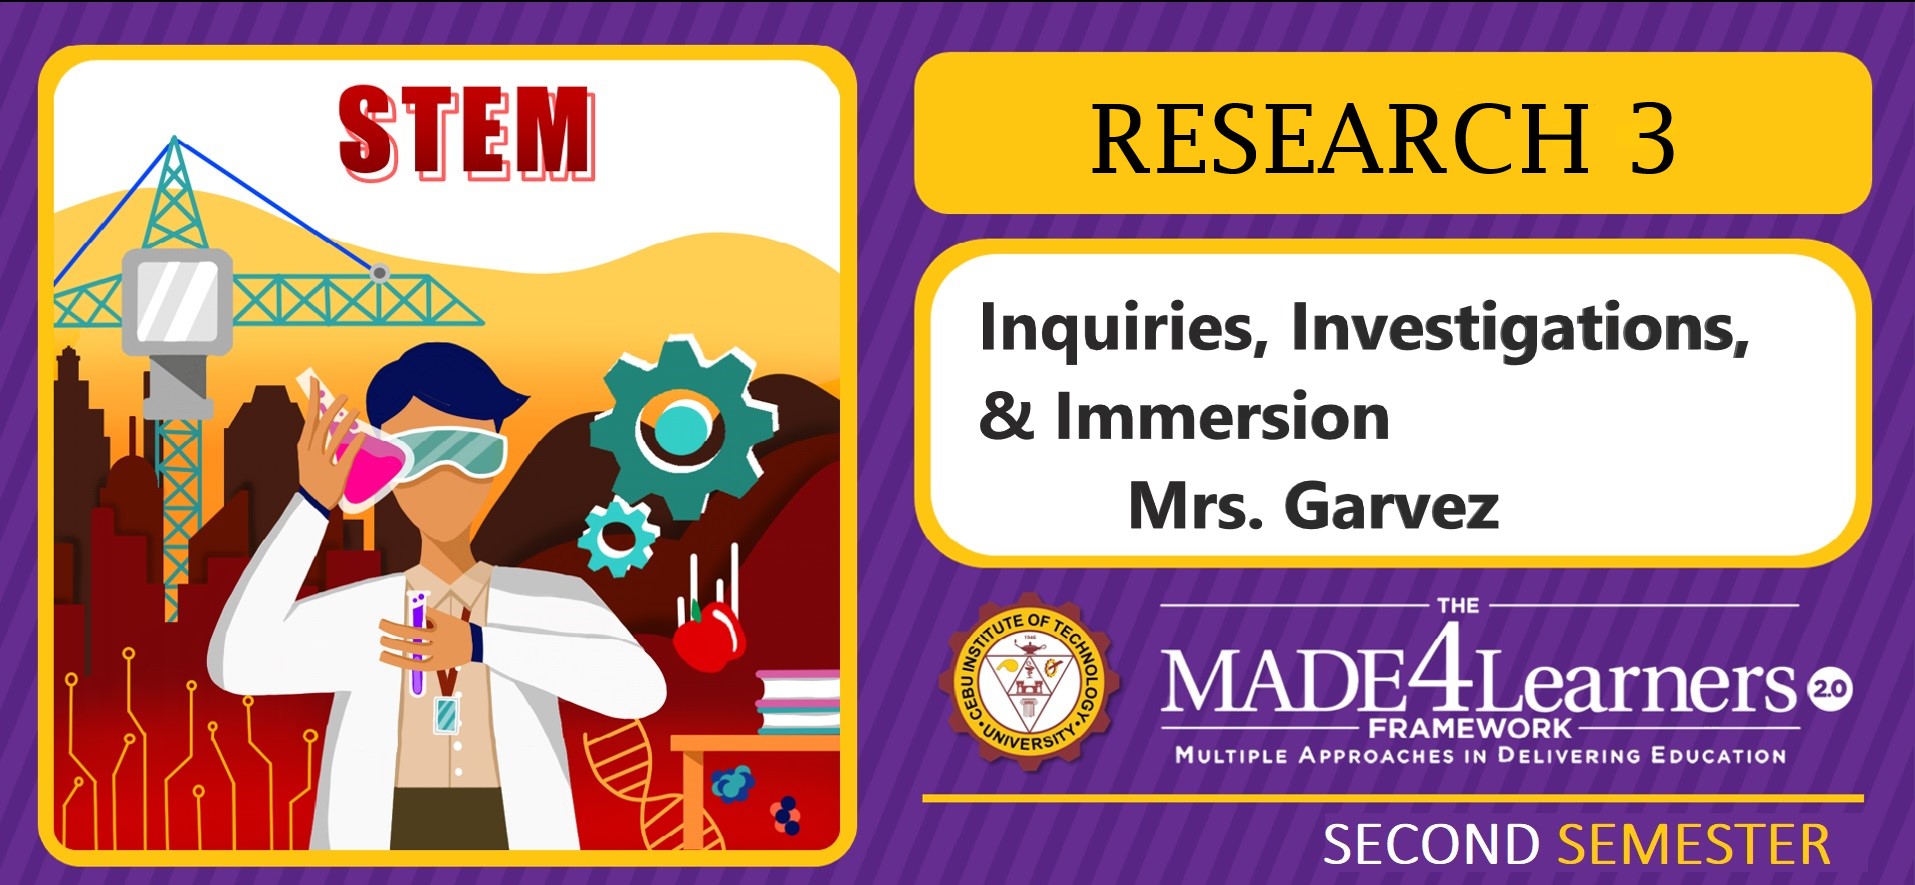 RES3: Research Inquiries, Investigation and Immersion (Garvez)